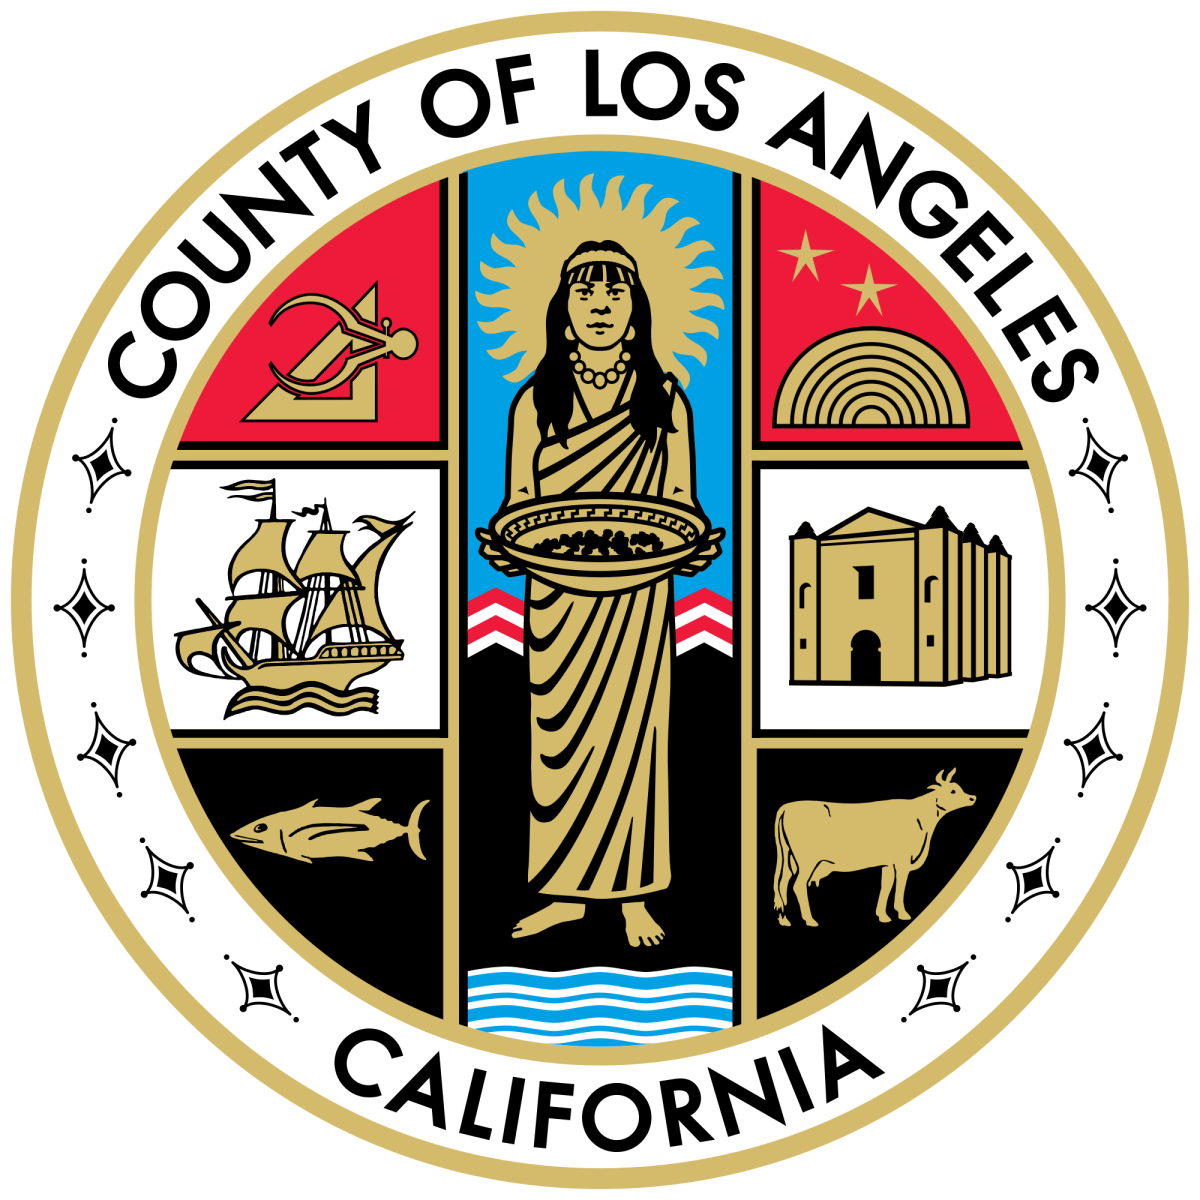 New LA County Assistance Program for Renters, Landlords & Immigrants (updated 1/8/2021)